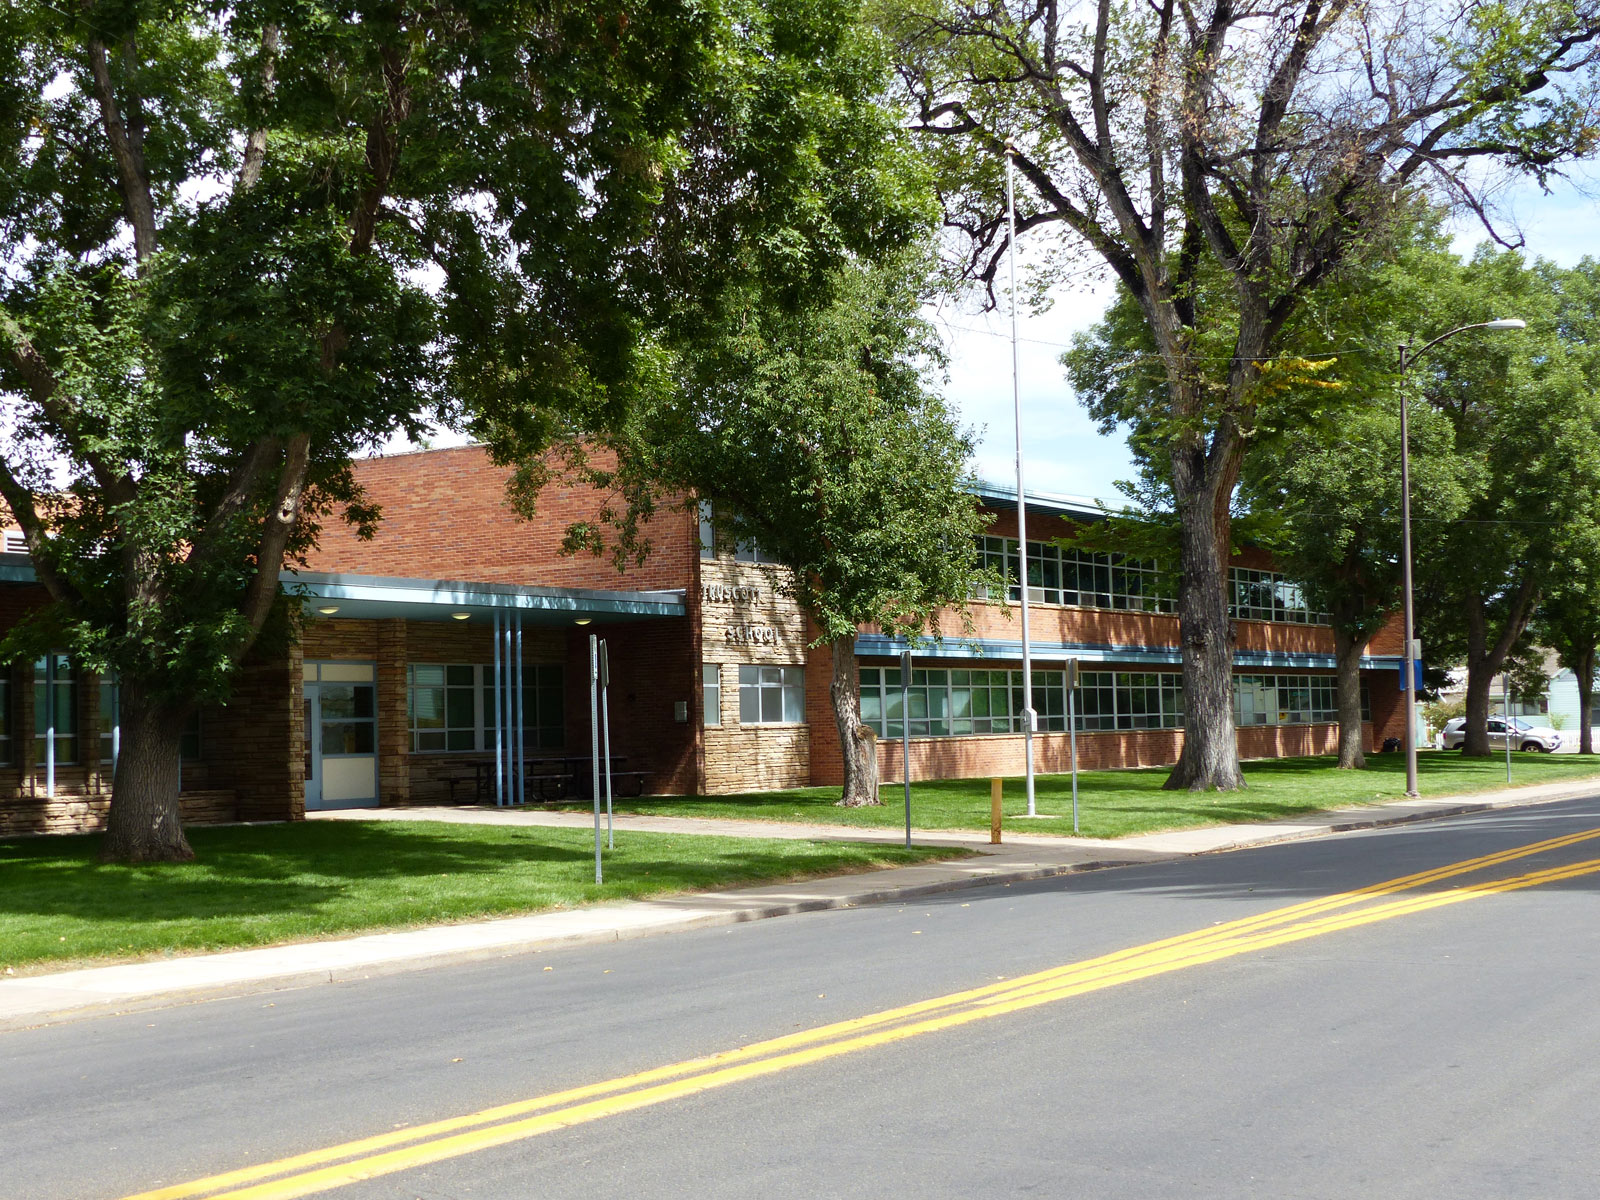 A view of Truscott Junior High School from the street.